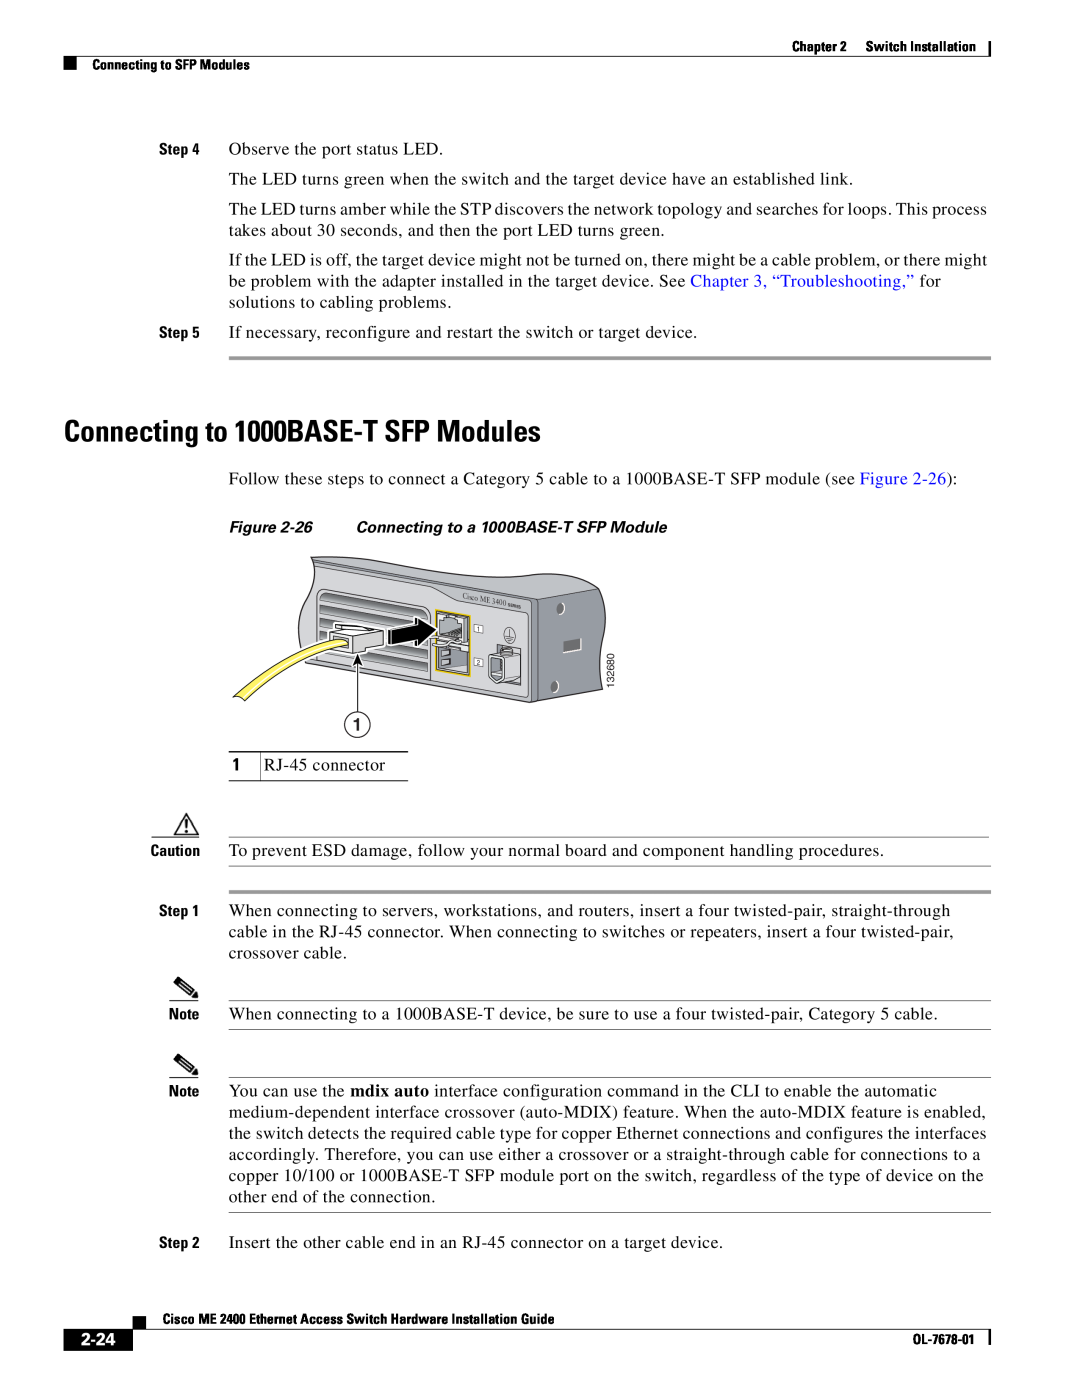 Cisco Systems ME 2400 manual Connecting to 1000BASE-T SFP Modules, 2-24, 26 Connecting to a 1000BASE-T SFP Module 